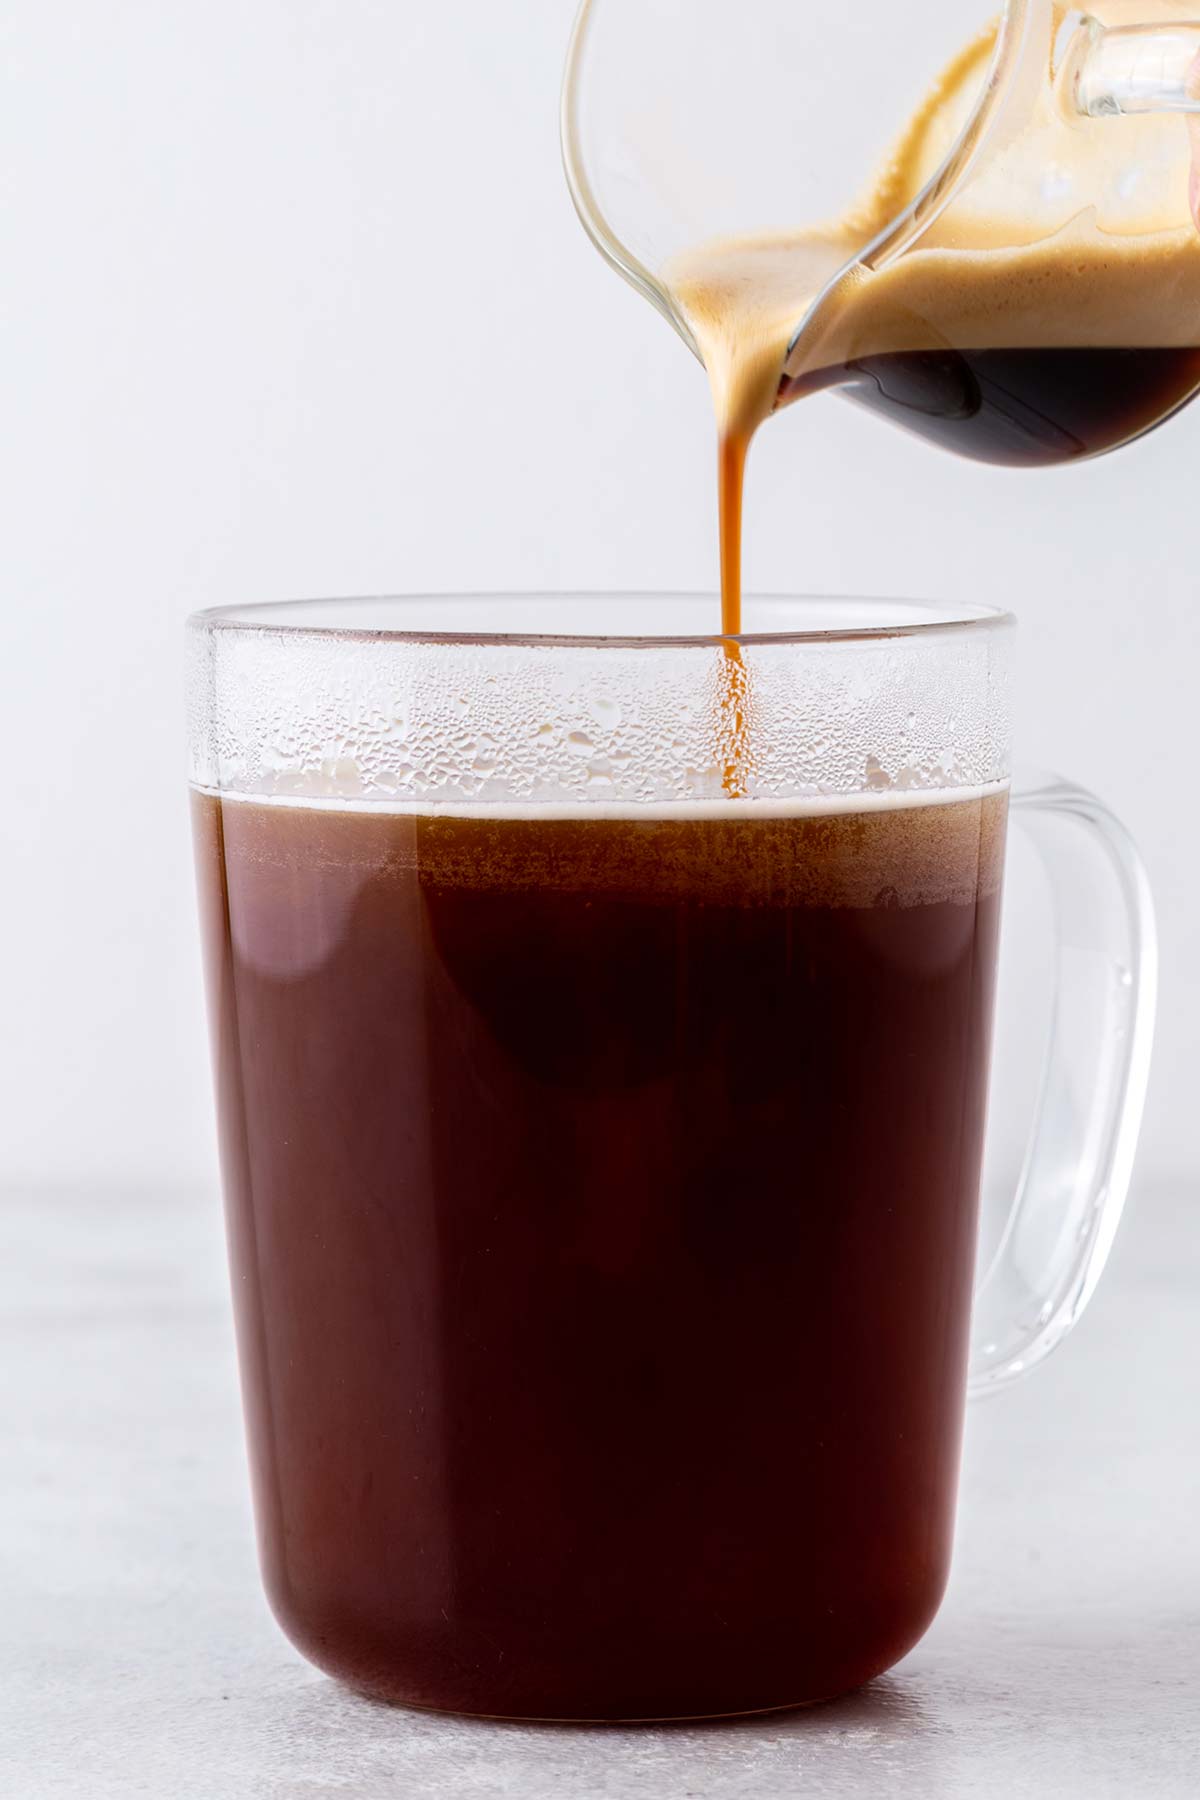 Pouring espresso into a mug with hot water.